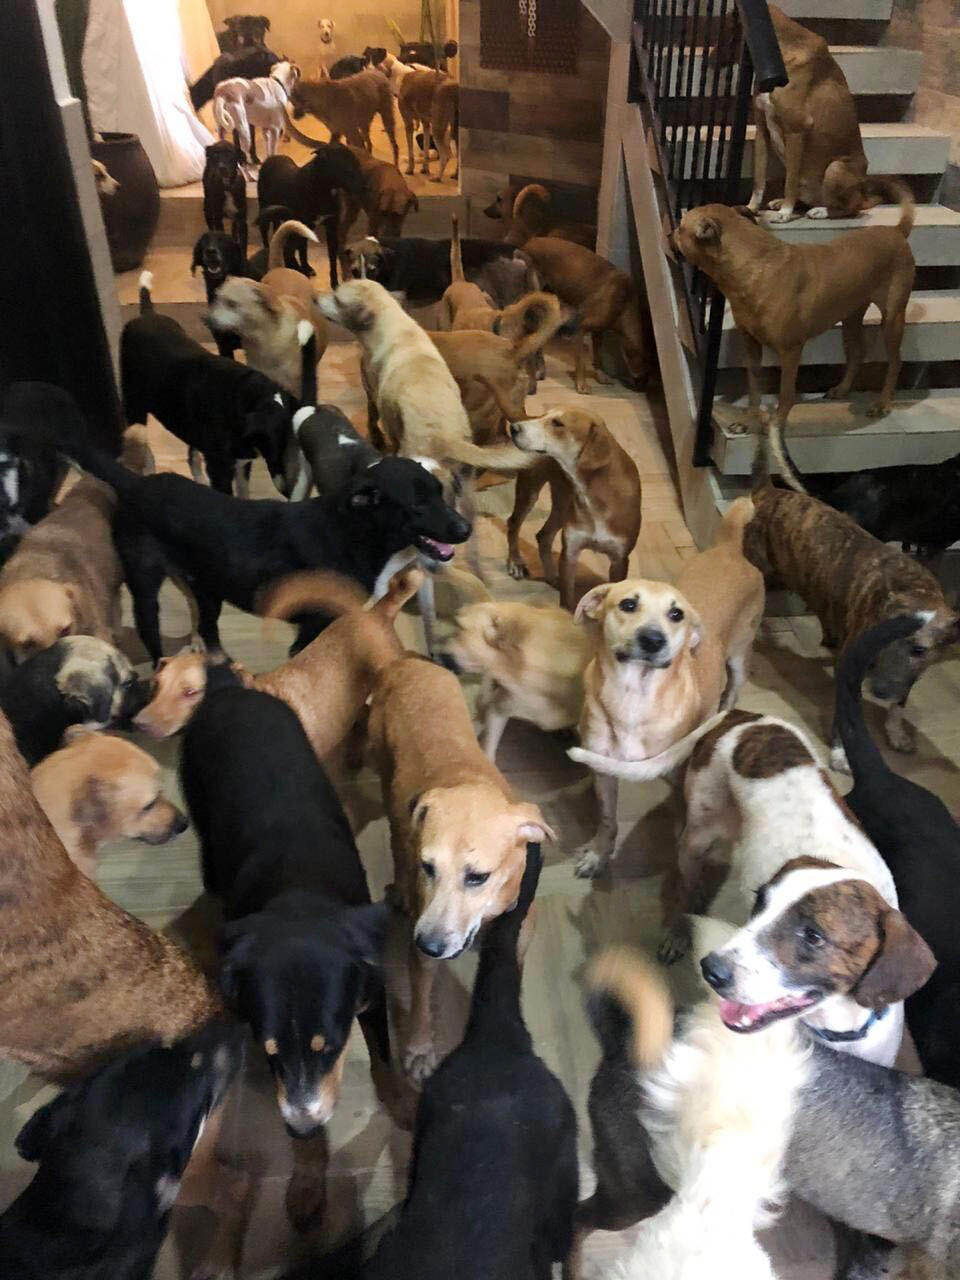 In this Oct. 7, 2020, photo provided by Daniela Rojas, rescue dogs fill the home of Ricardo Pimentel during Hurricane Delta in Leona Vicario, Mexico. Pimentel sheltered about 300 dogs in the home during the hurricane. (Daniela Rojas via AP)